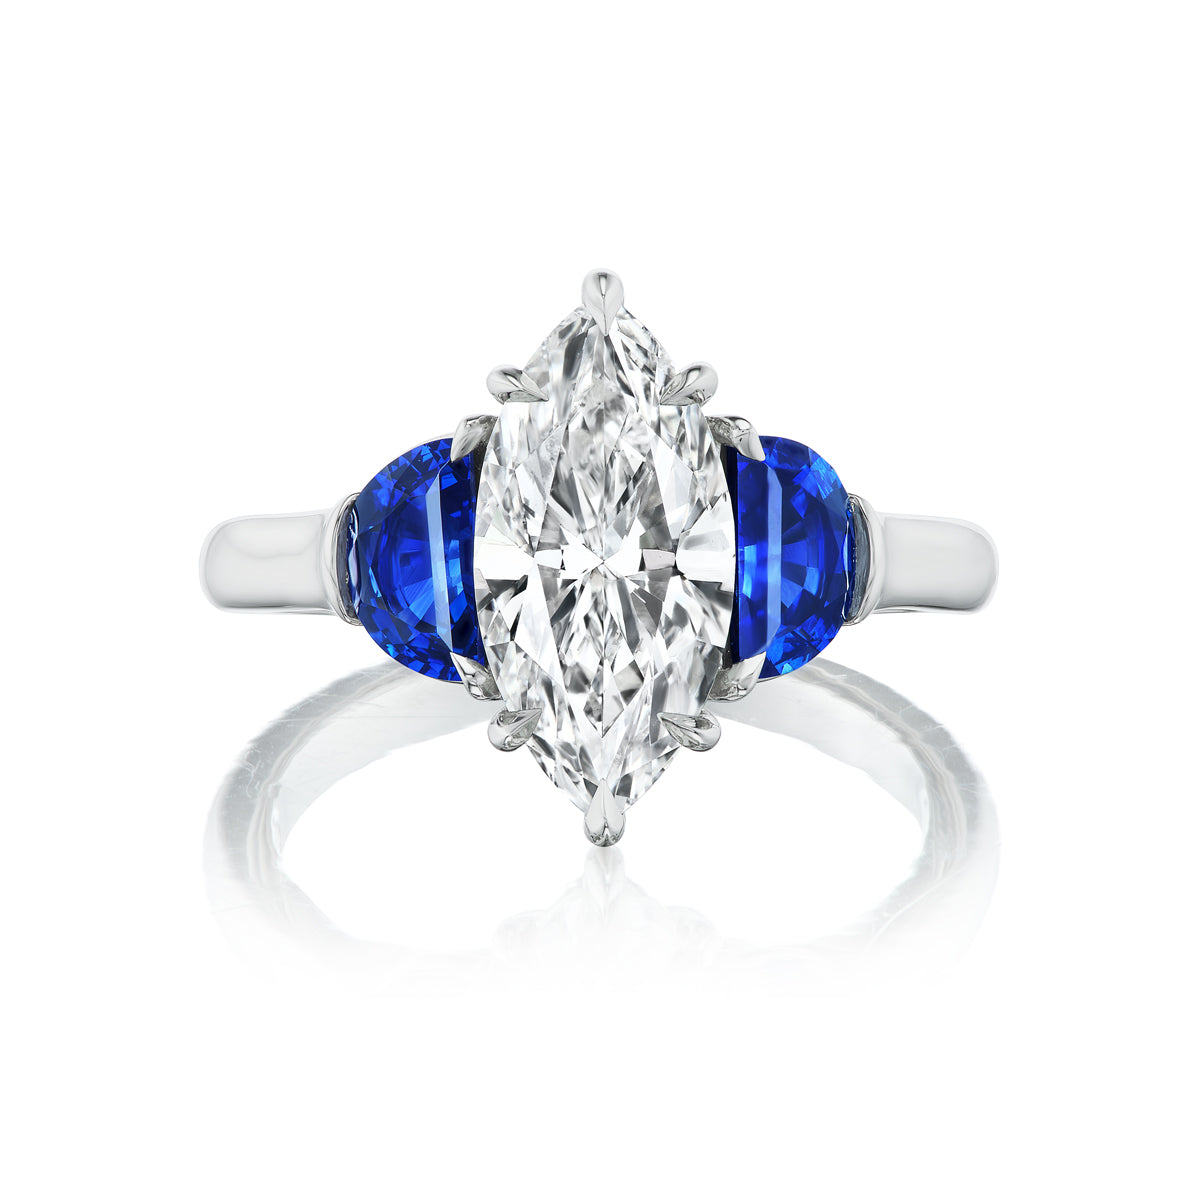 Marquise Diamond Engagement Ring with Half Moon Sapphire Side Stones